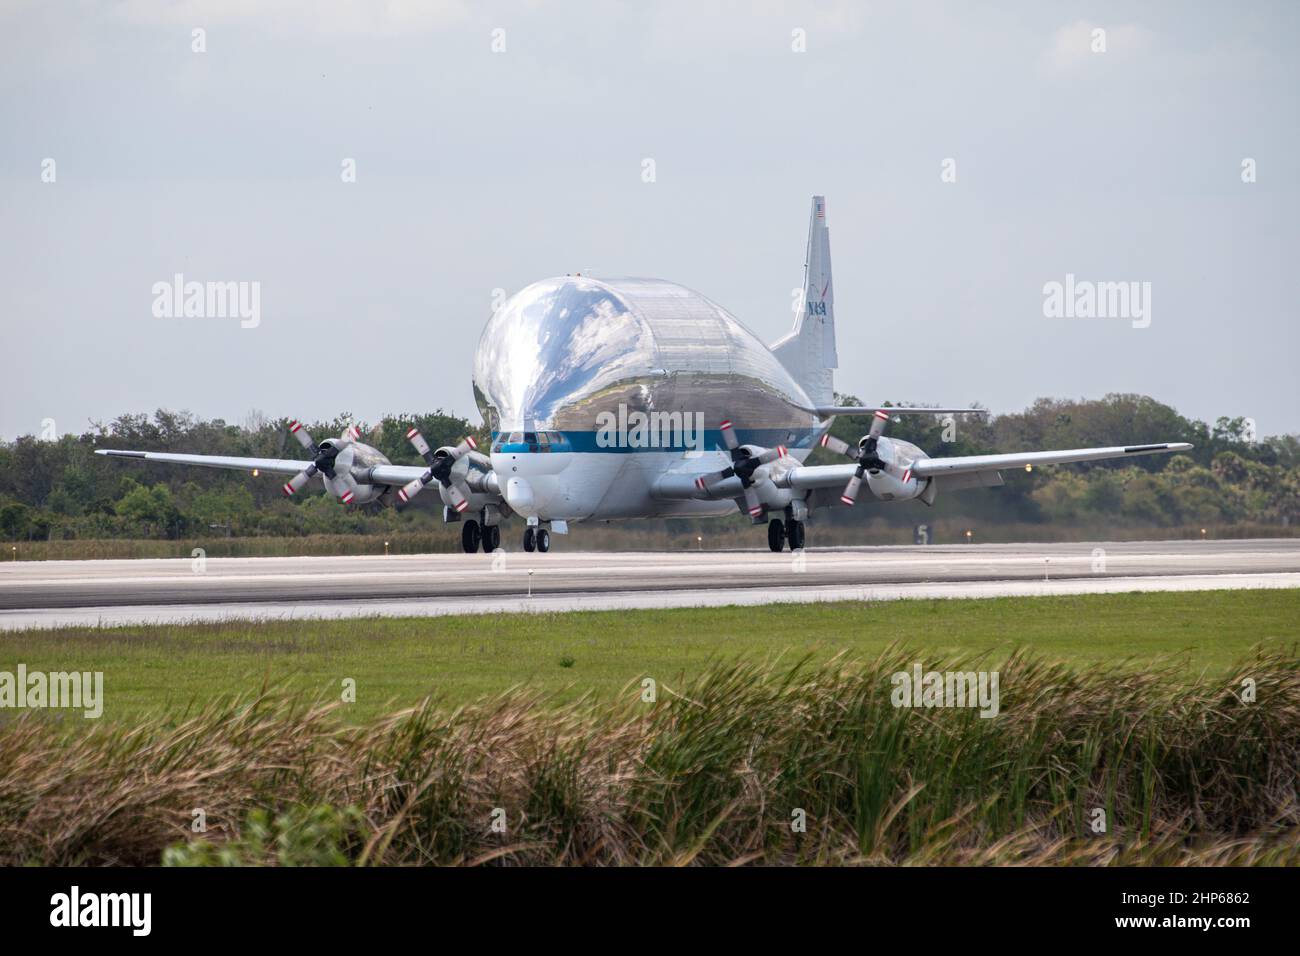 NASA’s Super Guppy aircraft, carrying the Orion spacecraft, lands at Kennedy Space Center’s Launch and Landing Facility runway in Florida on March 25, 2020. Orion has returned to Kennedy after testing at the agency’s Plum Brook Station in Ohio verified the spacecraft can handle the extreme conditions of a deep-space environment. The spacecraft will now undergo final testing and assembly prior to being integrated with the Space Launch System rocket. Stock Photo